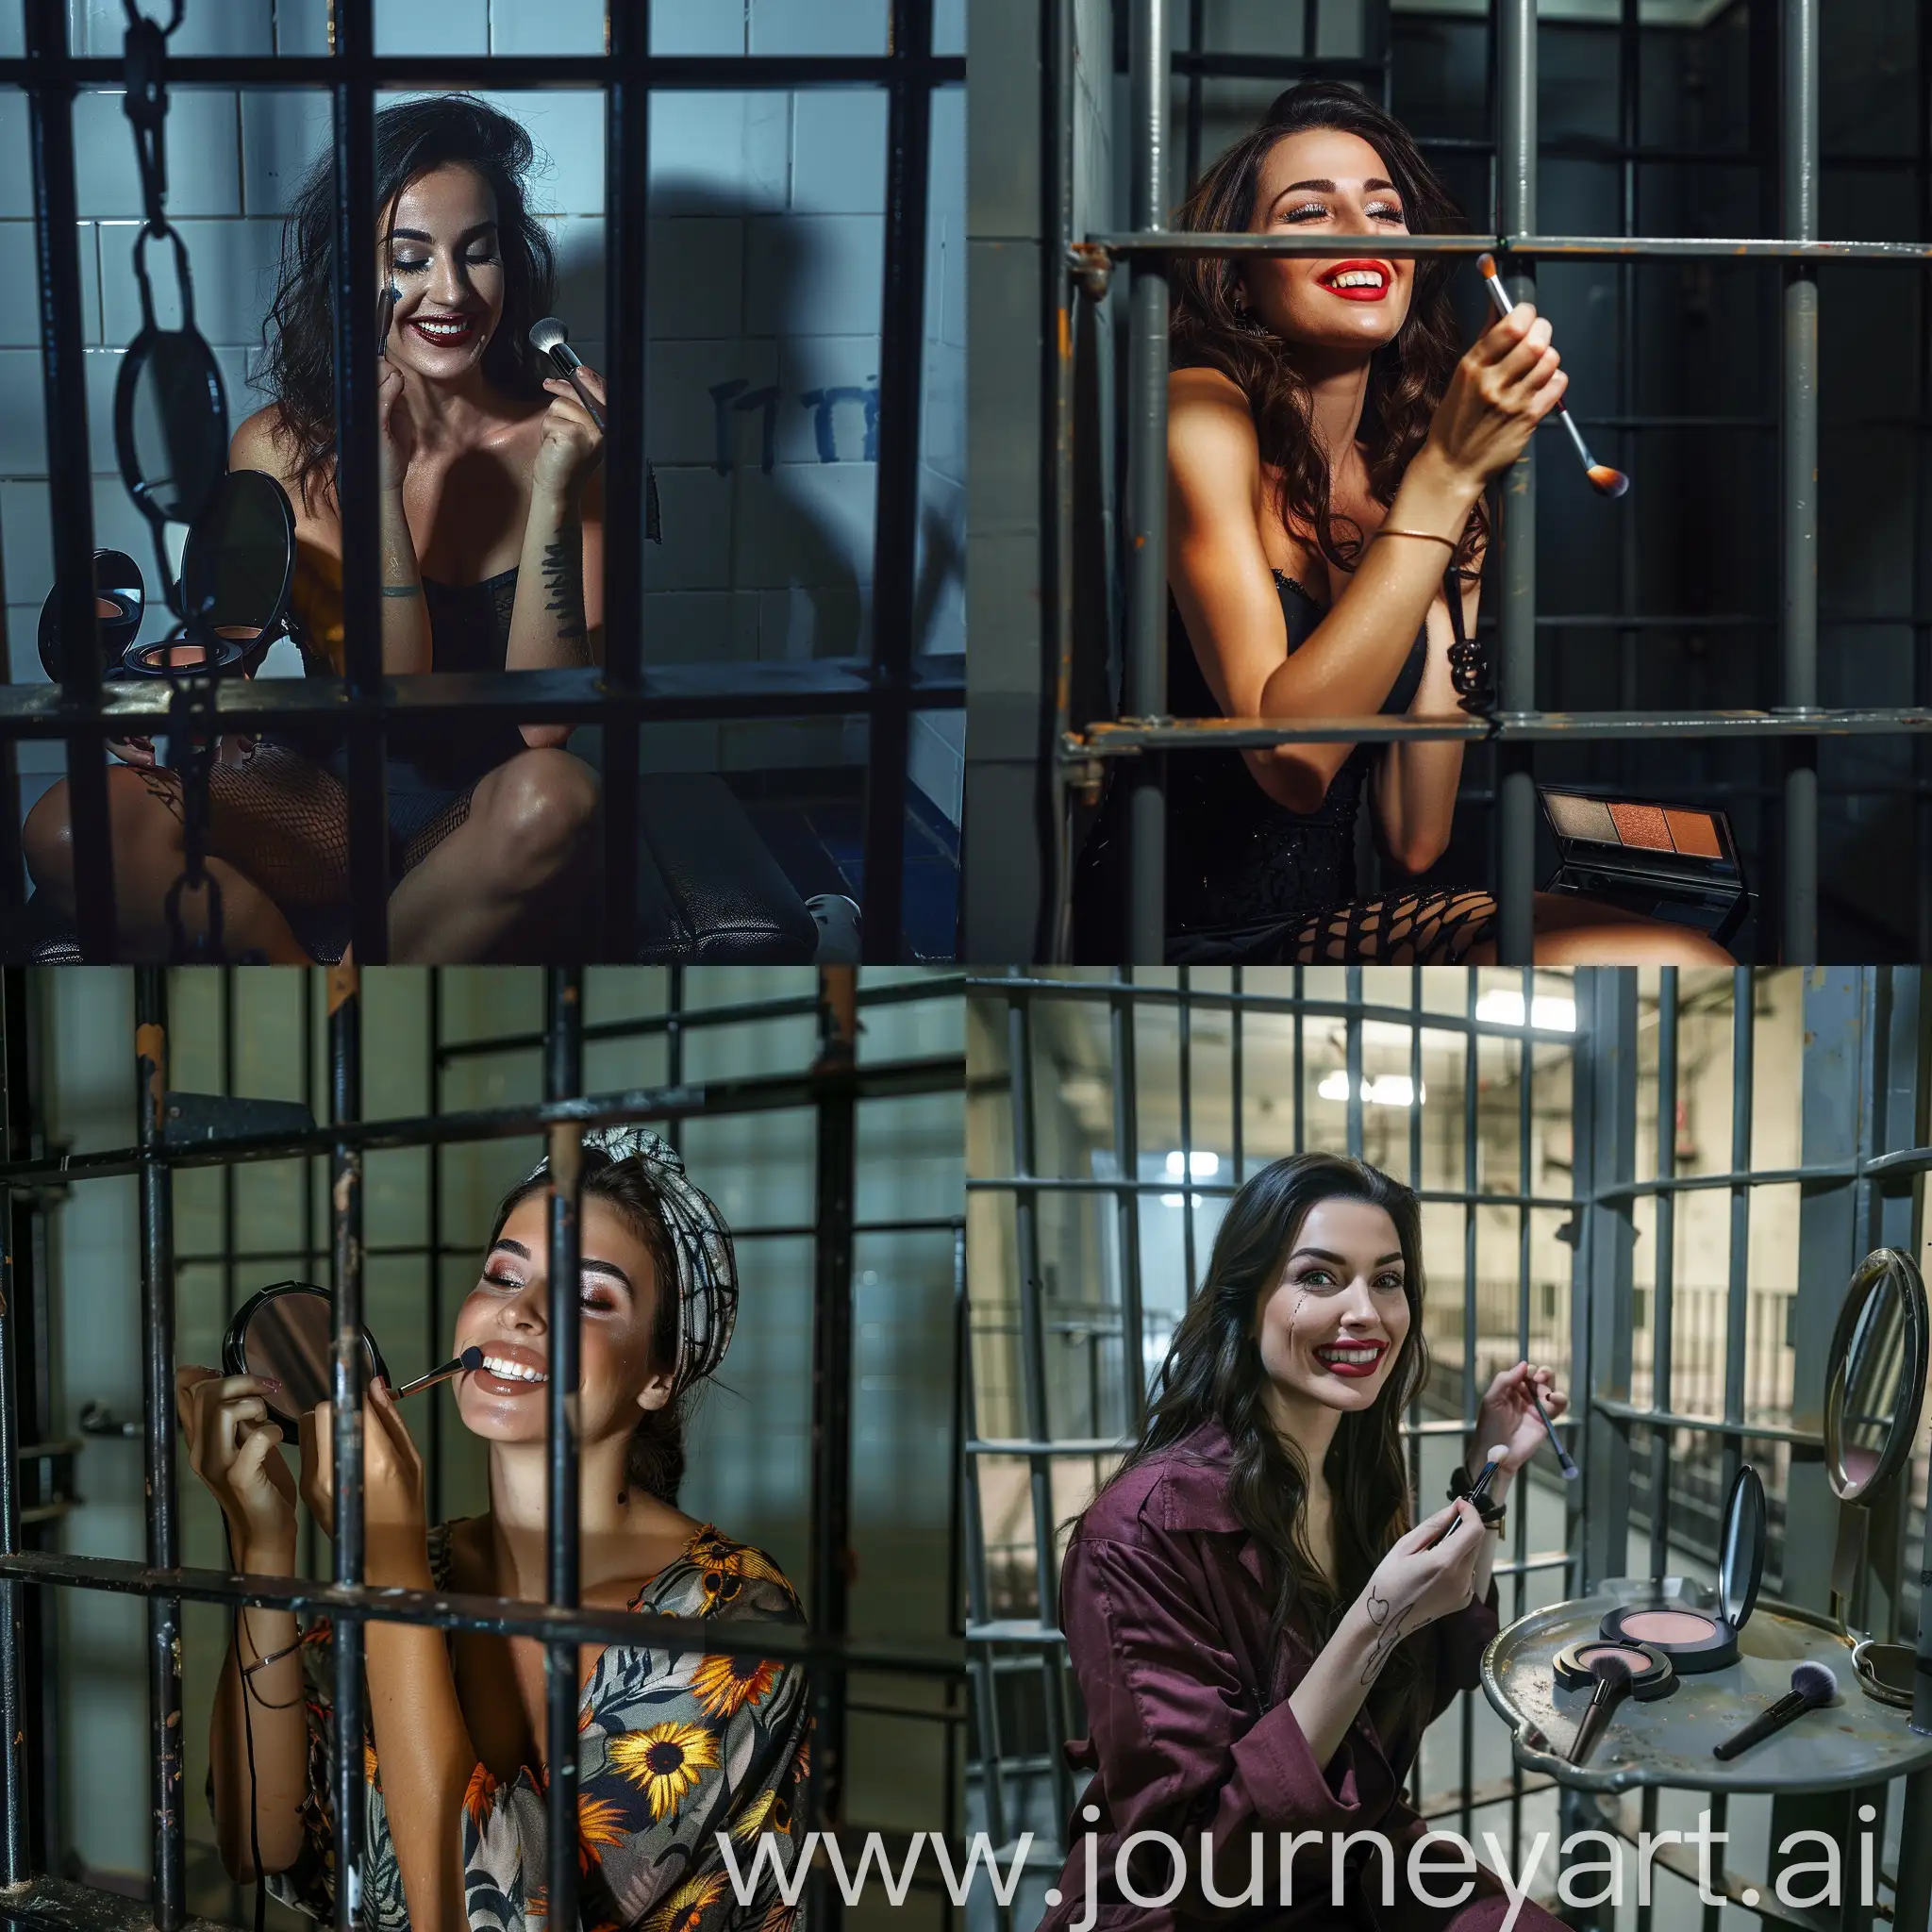 A beautiful woman is happily doing makeup in a prison cell.